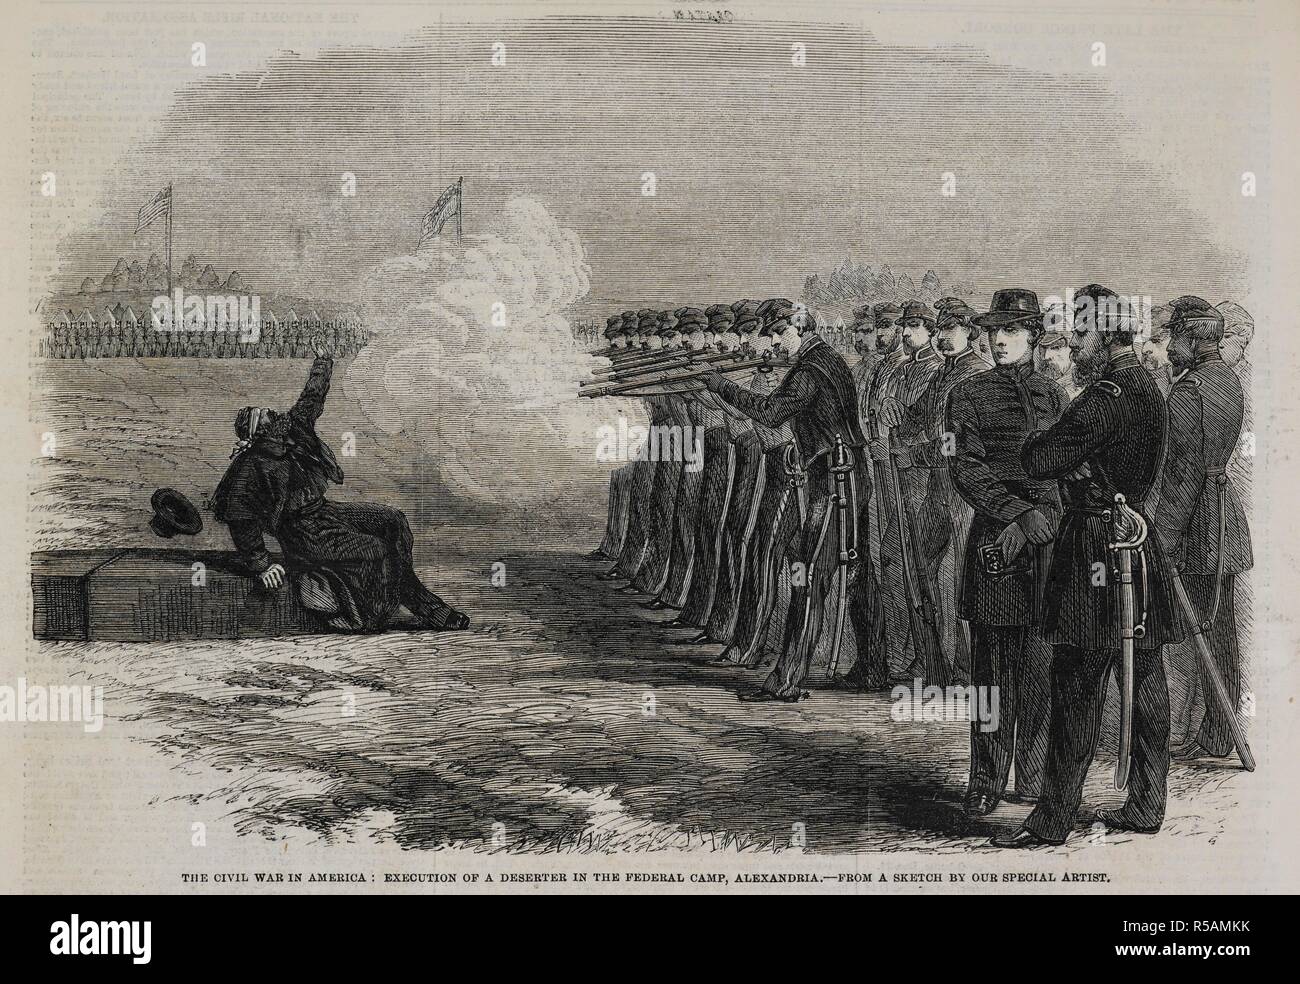 The civil war in America : Execution of a deserter in the federal camp, Alexandria. Illustrated London News. London, January 11, 1862. American civil war. Source: P.P.7611 page 40 volume 40. Stock Photo